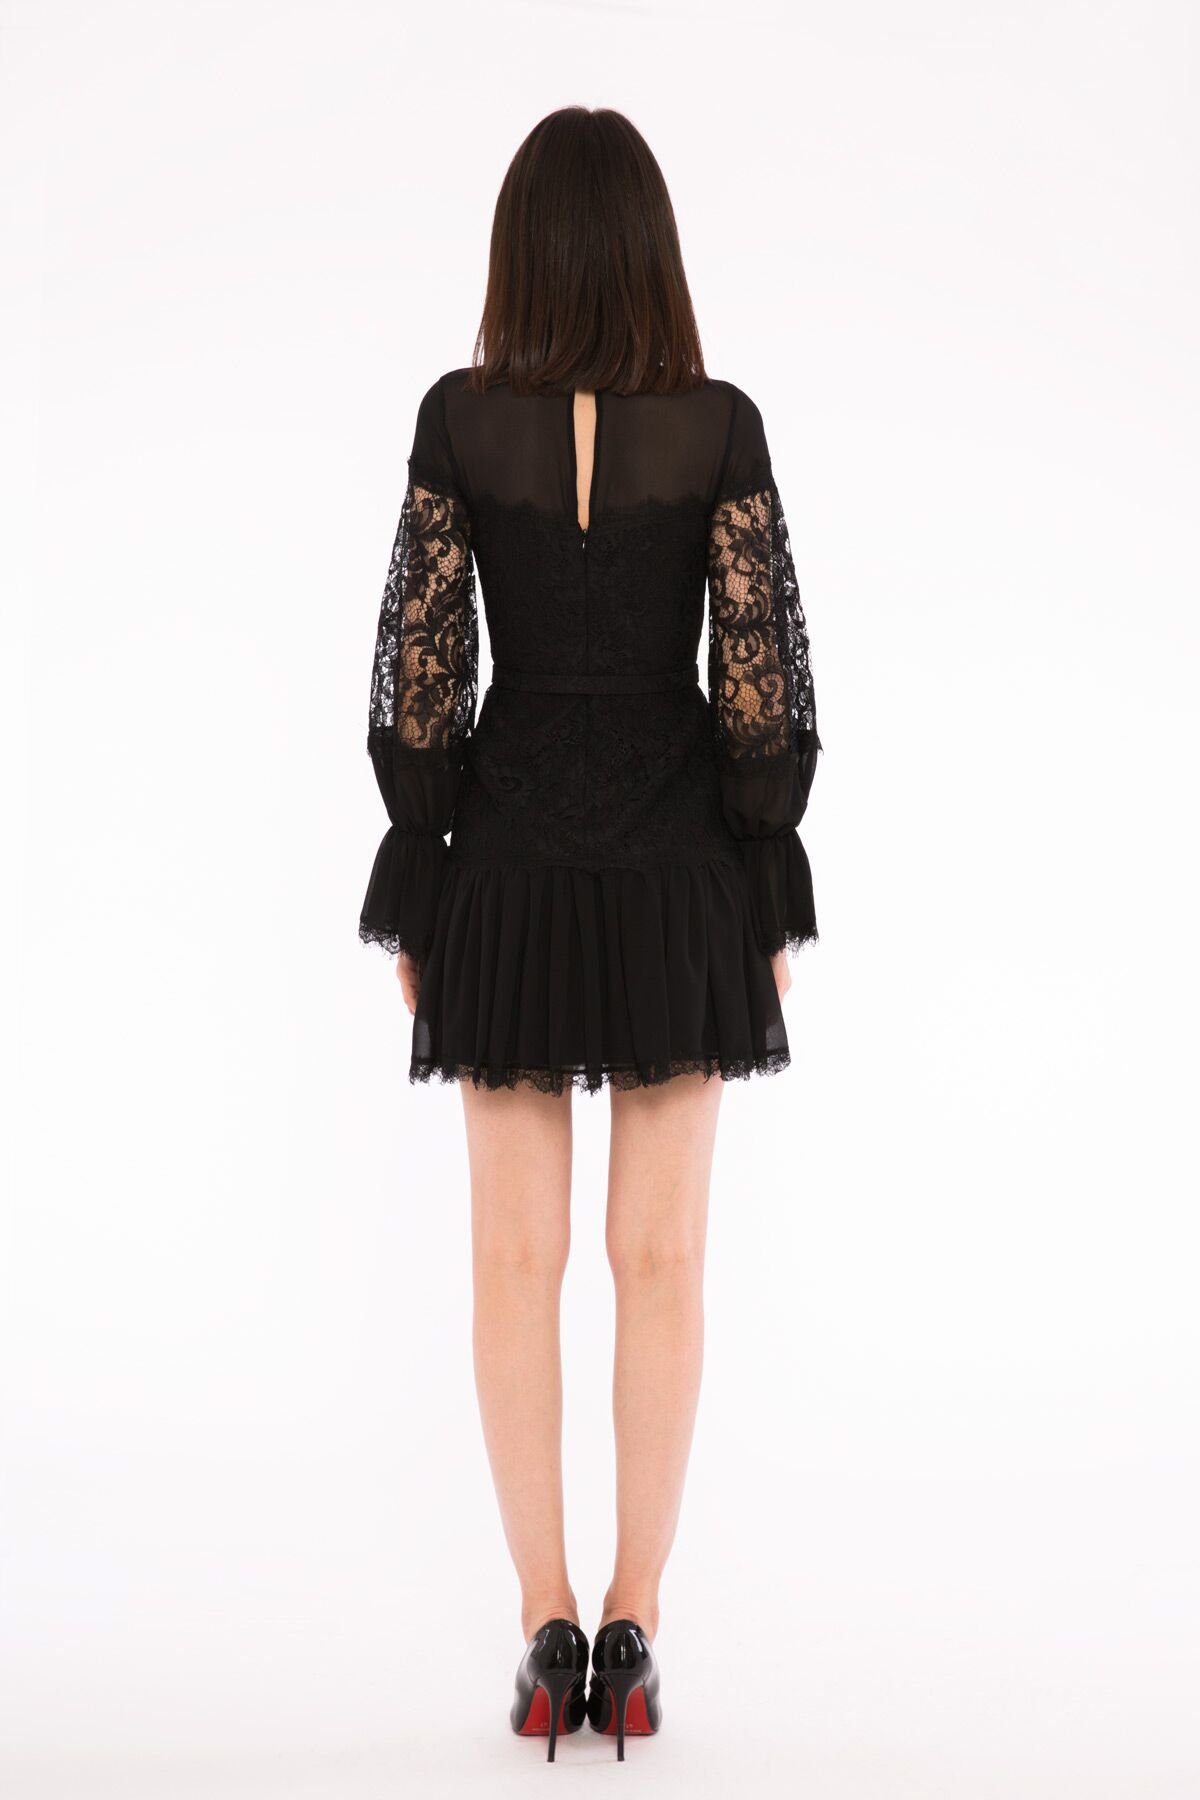 Ruffle Detailed Standing Neck Mini Length Lace Black Party Dress